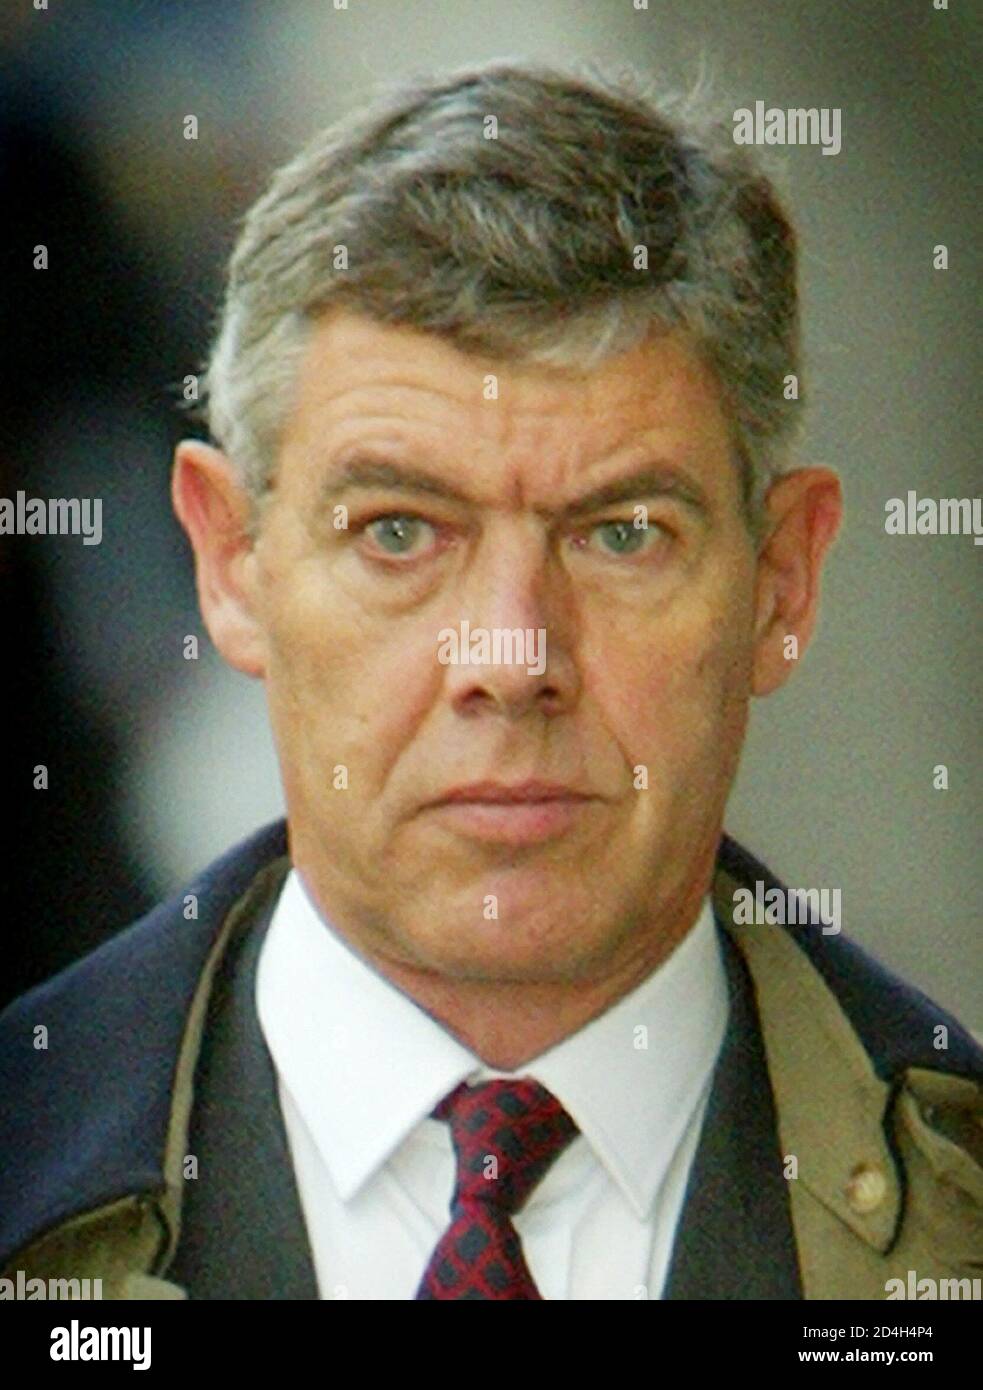 Barrister Richard Latham, leading the prosecution in the Soham murder trial, arrives at the Old Bailey in London, November 4, 2003. Britain's Old Bailey court continued the process on Tuesday of selecting a jury for the trial of former school caretaker Ian Huntley who is charged with the double murder of British schoolgirls Holly Wells and Jessica Chapman in August 2002. REUTERS/Peter Macdiarmid  PKM/ASA/KAF Stock Photo